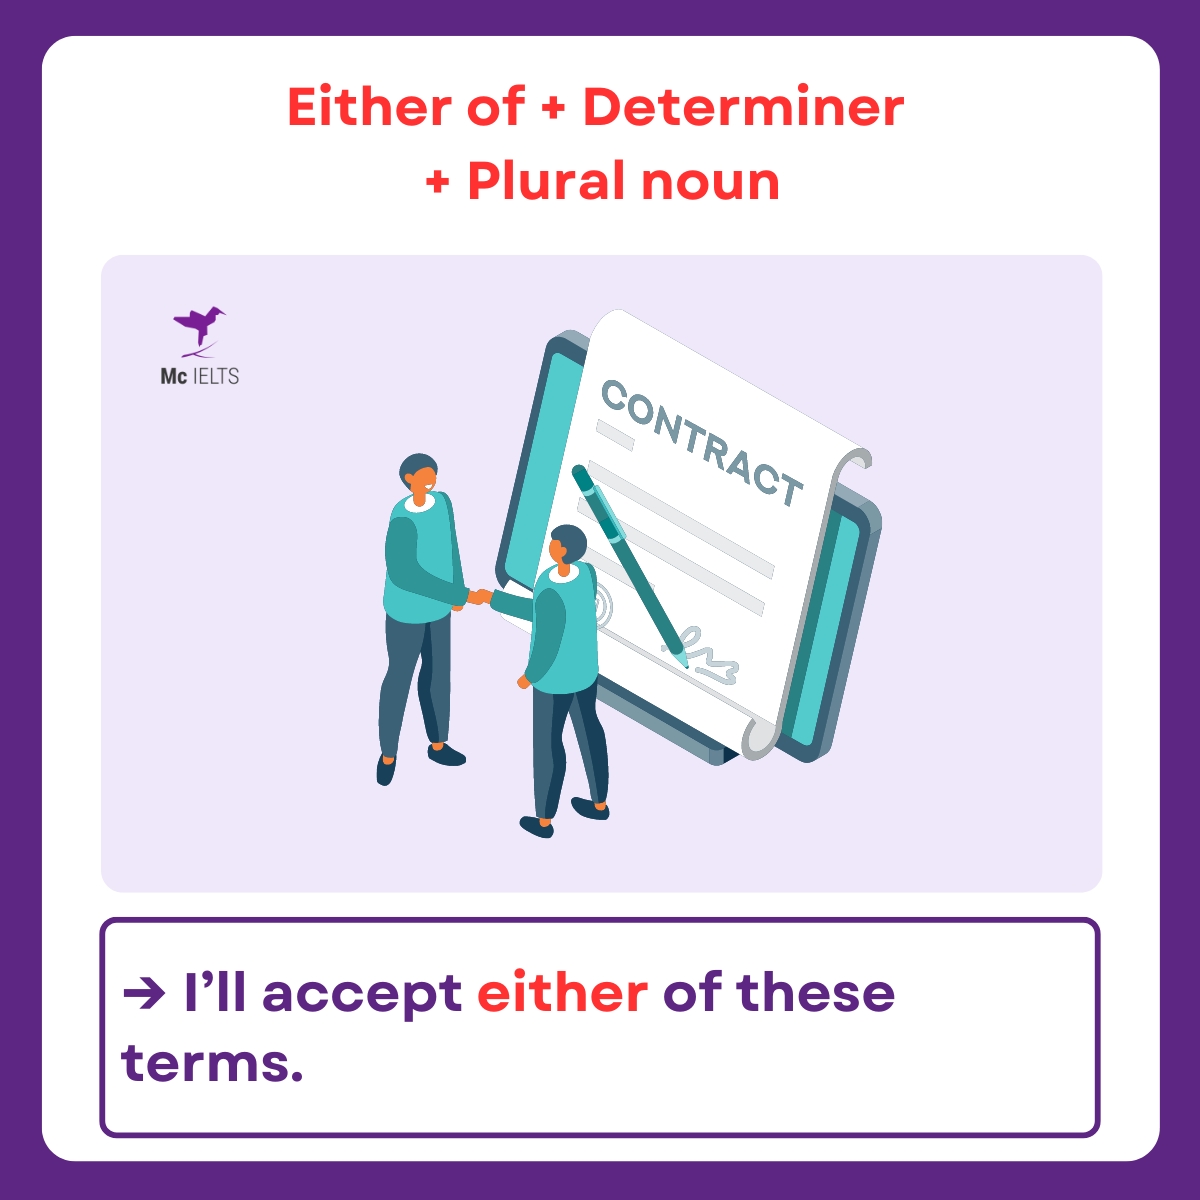 Ví dụ cấu trúc either neither: Either of + Determiner + Plural nouns